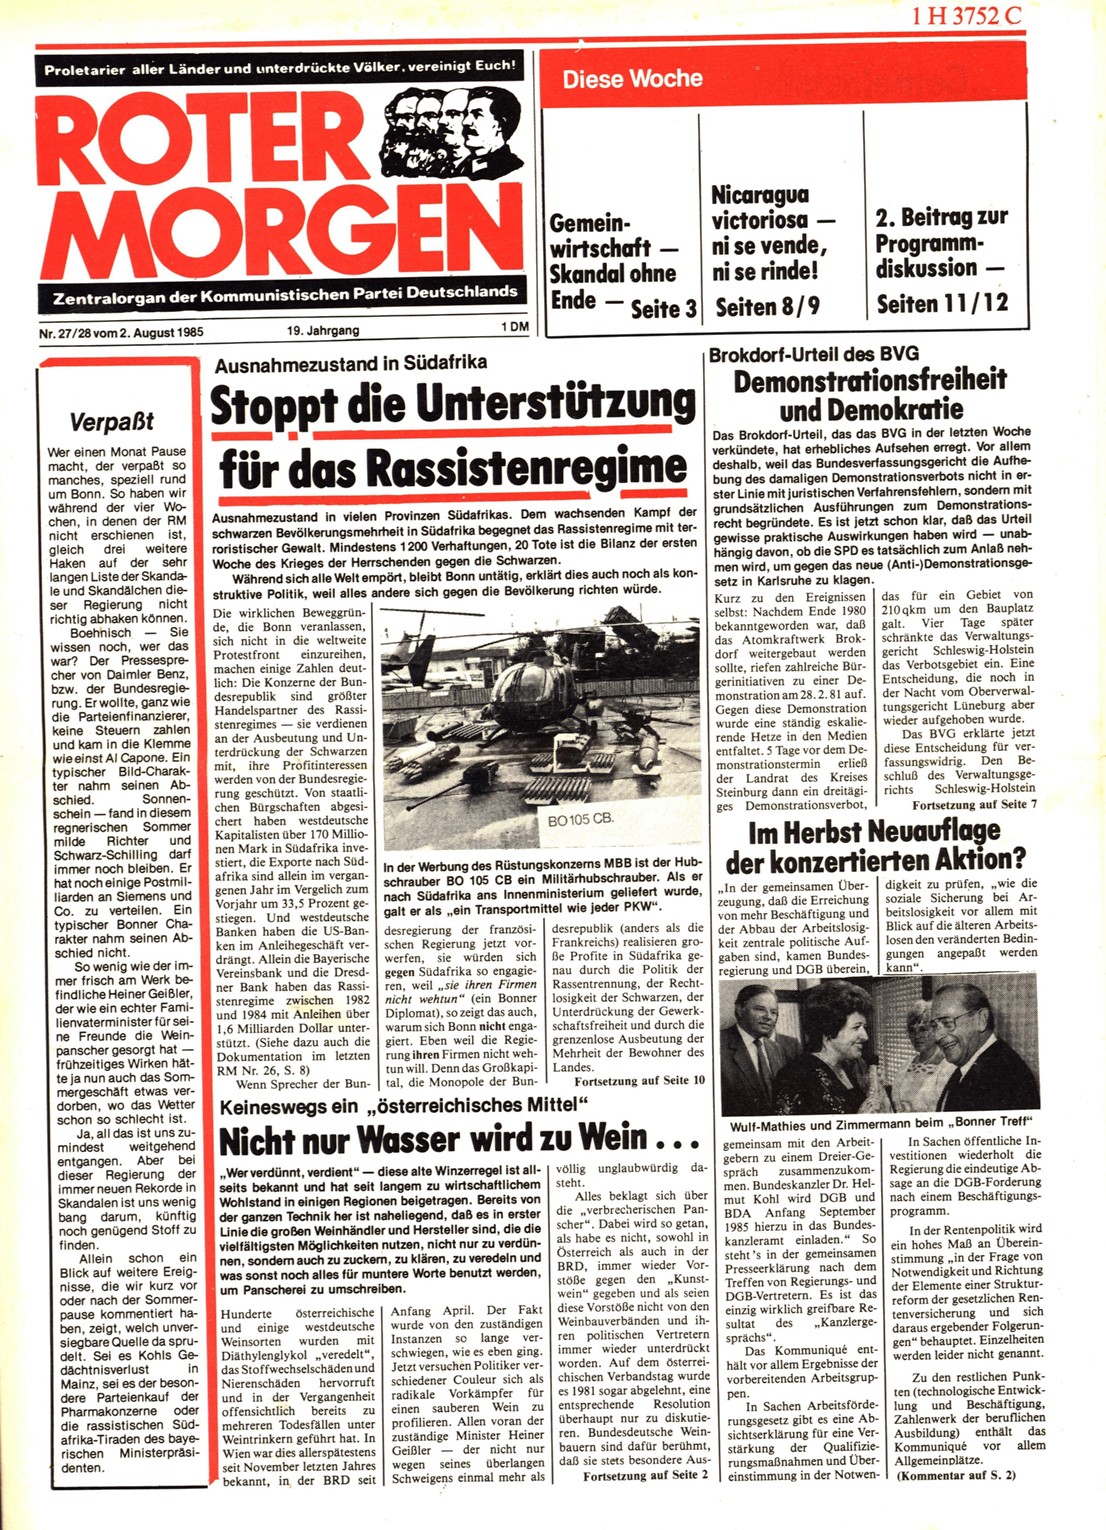 Roter Morgen, 19. Jg., 2. August 1985, Nr. 27/28, Seite 1